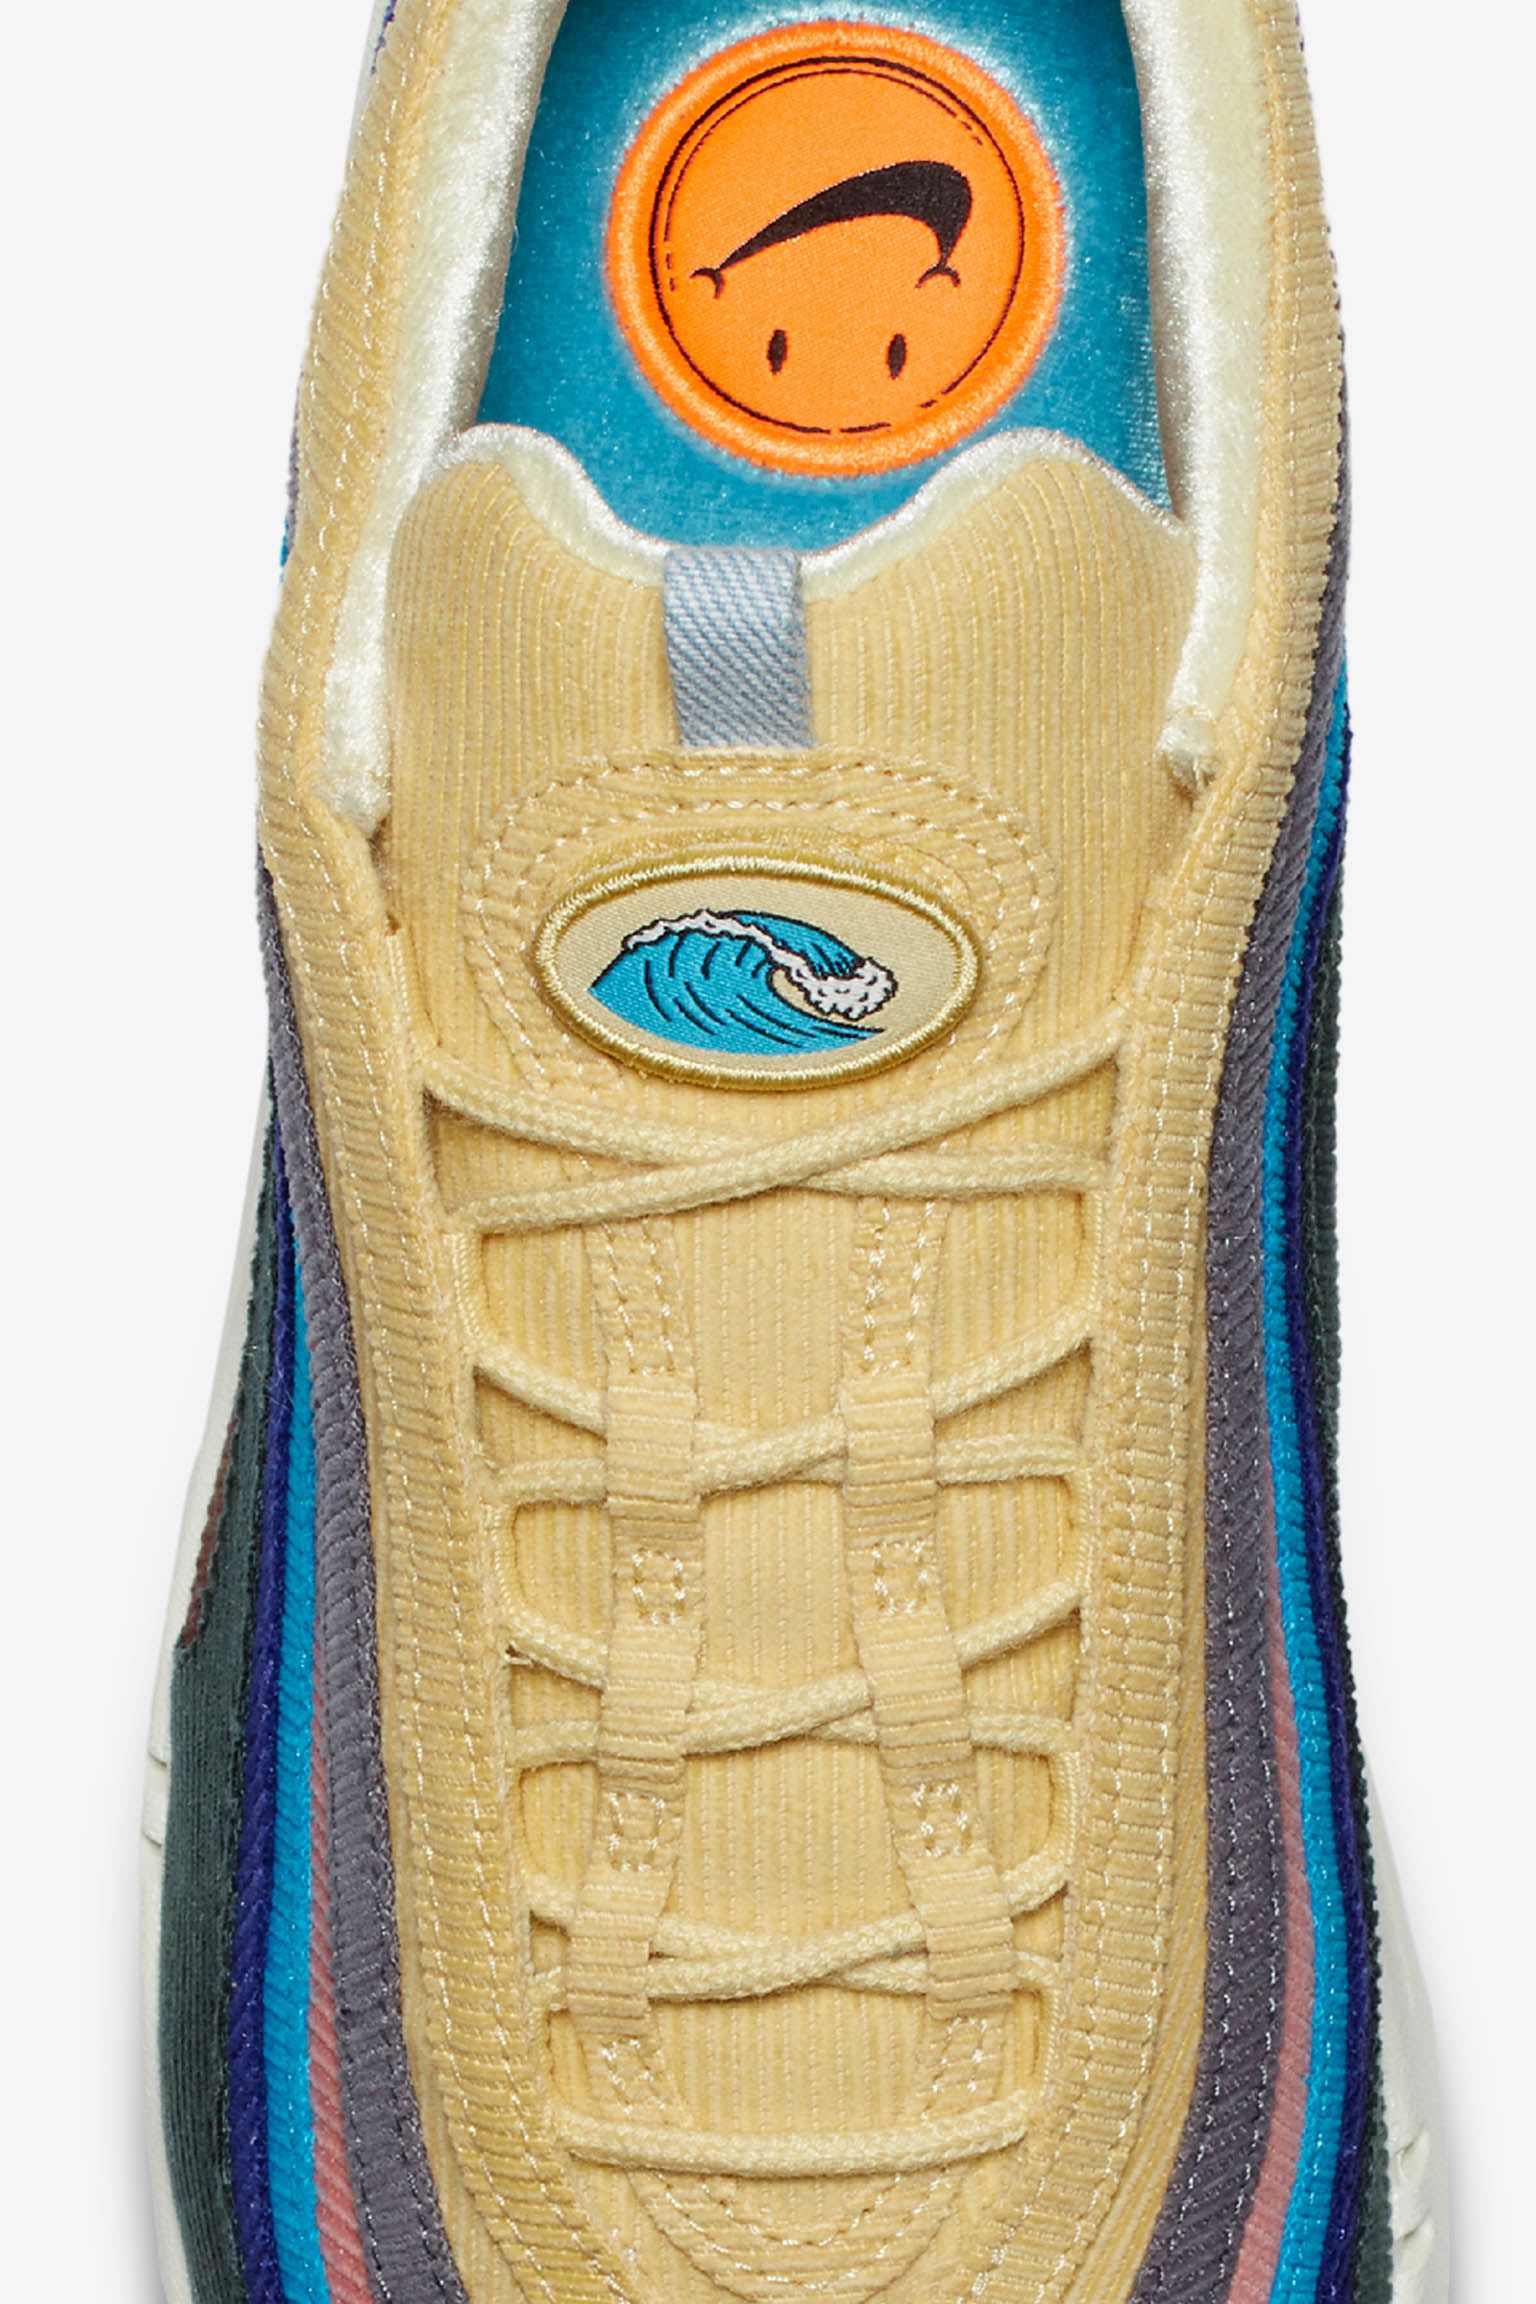 Nike Air Max 1/97 'Sean Wotherspoon' Release Date. Nike SNKRS جورج تاون